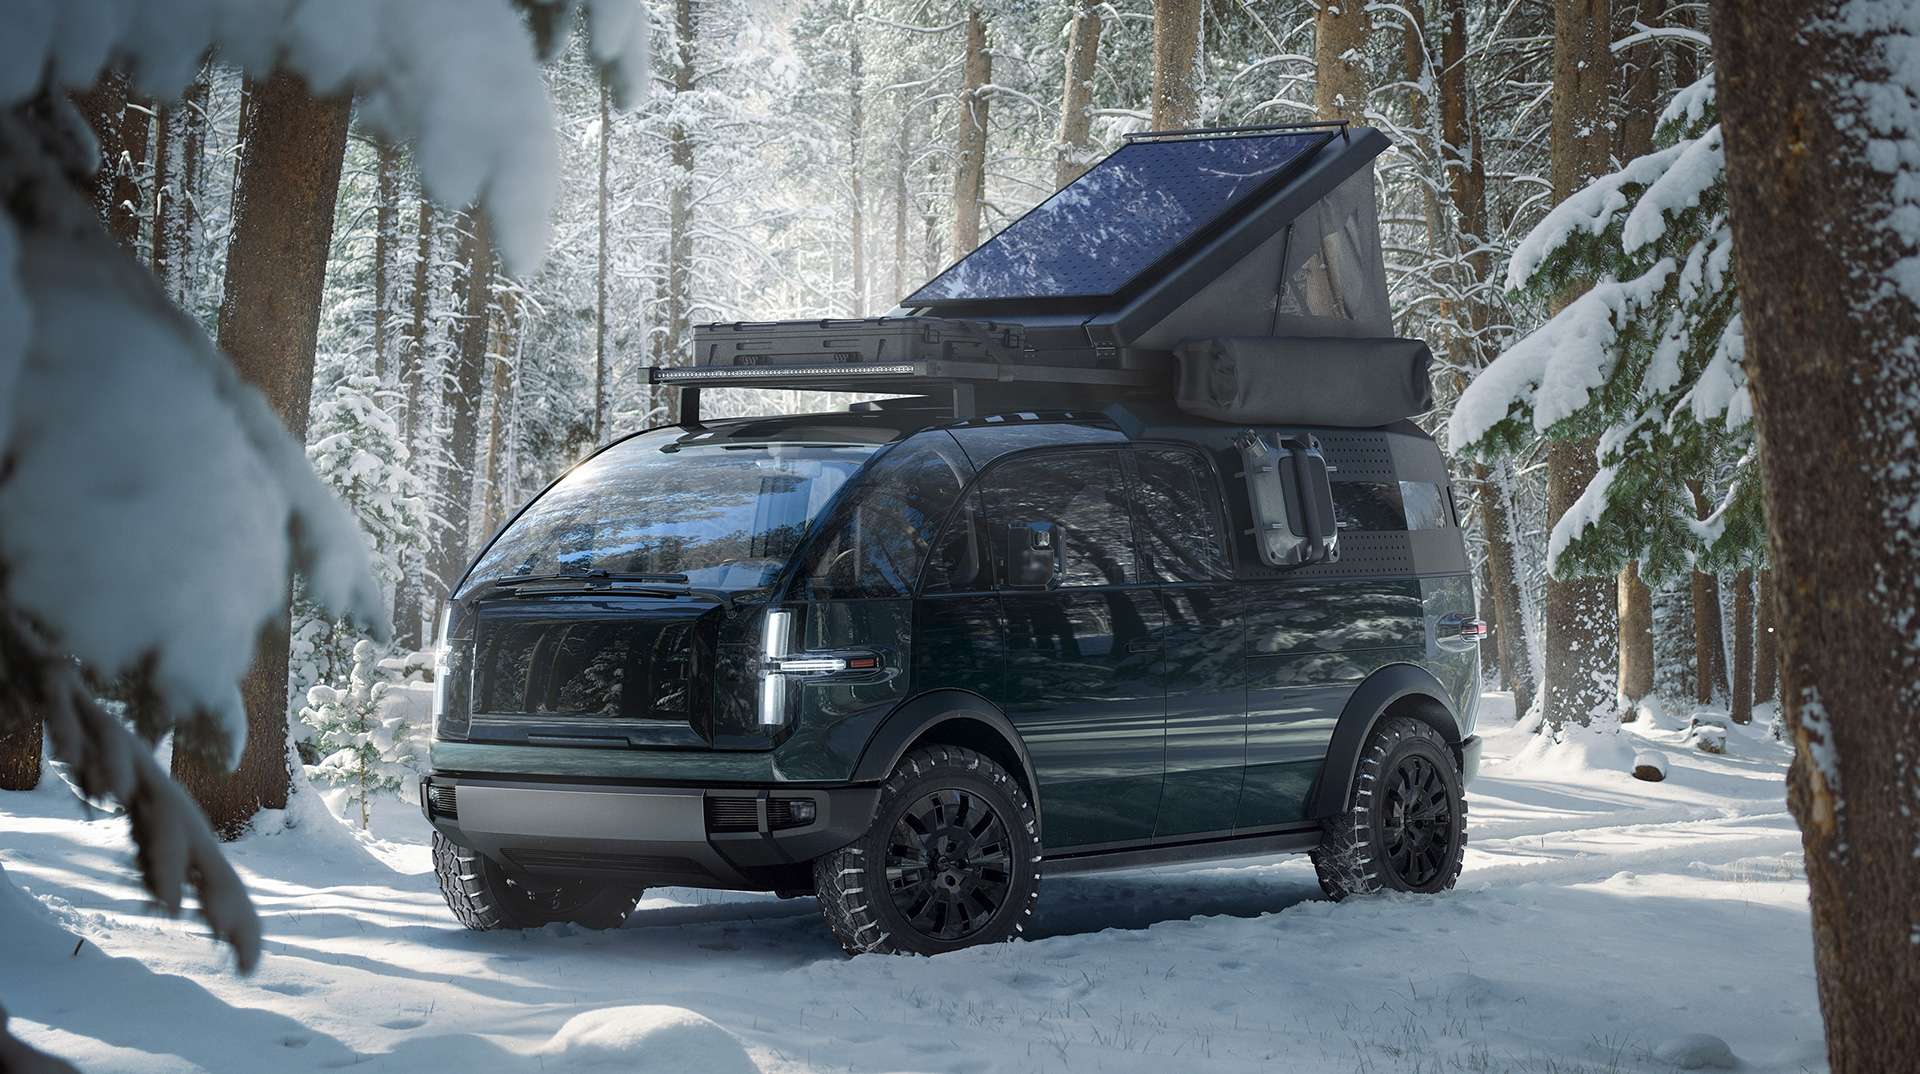 Canoo truck with camper attached in a snowy forest from Canoo website